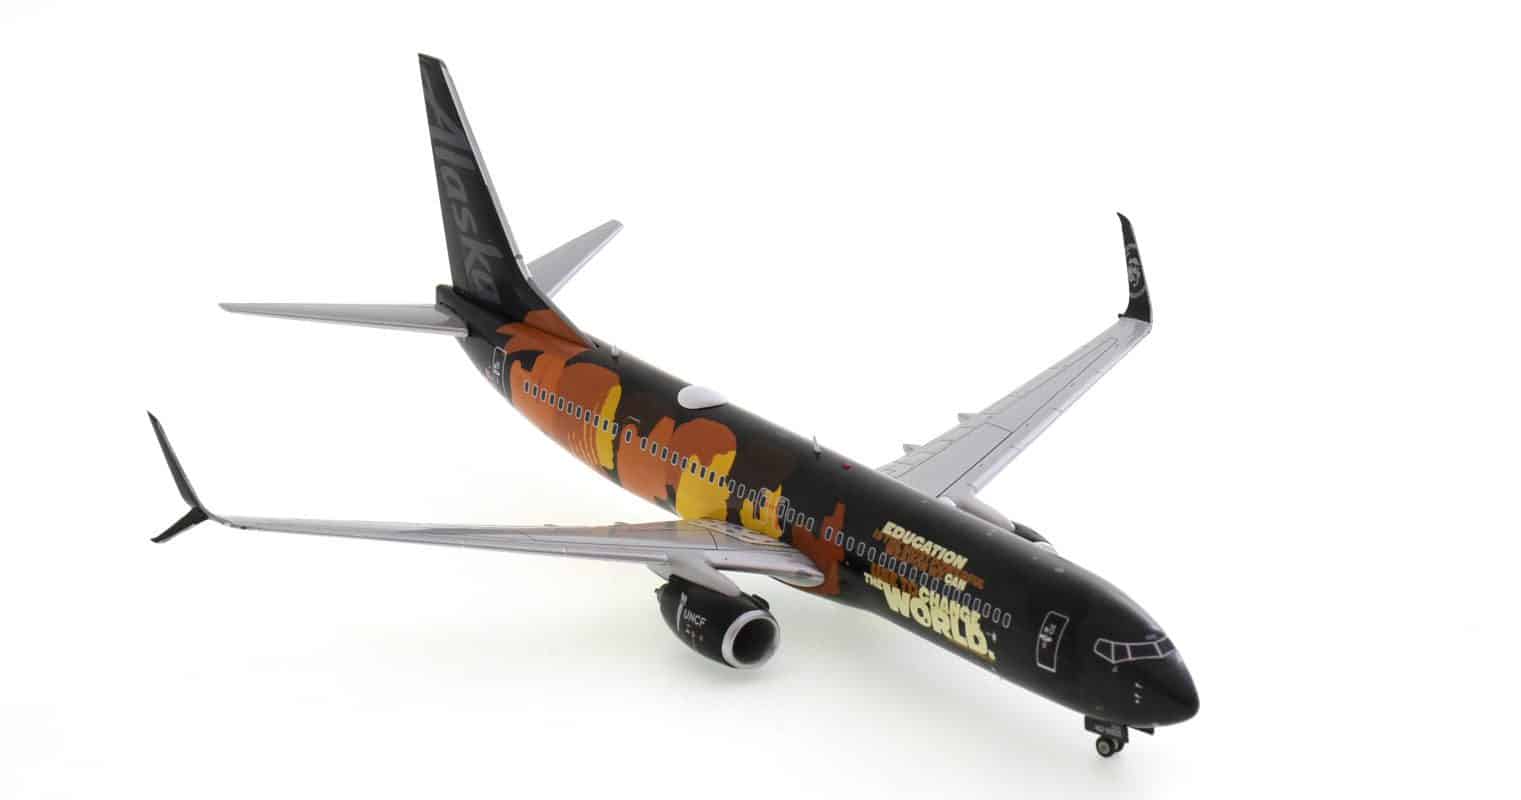 Front starboard side view of Gemini Jets G2ASA1016 - 1/200 scale diecast model of the B737-900ER registration N492AS in Alaska Airline's 